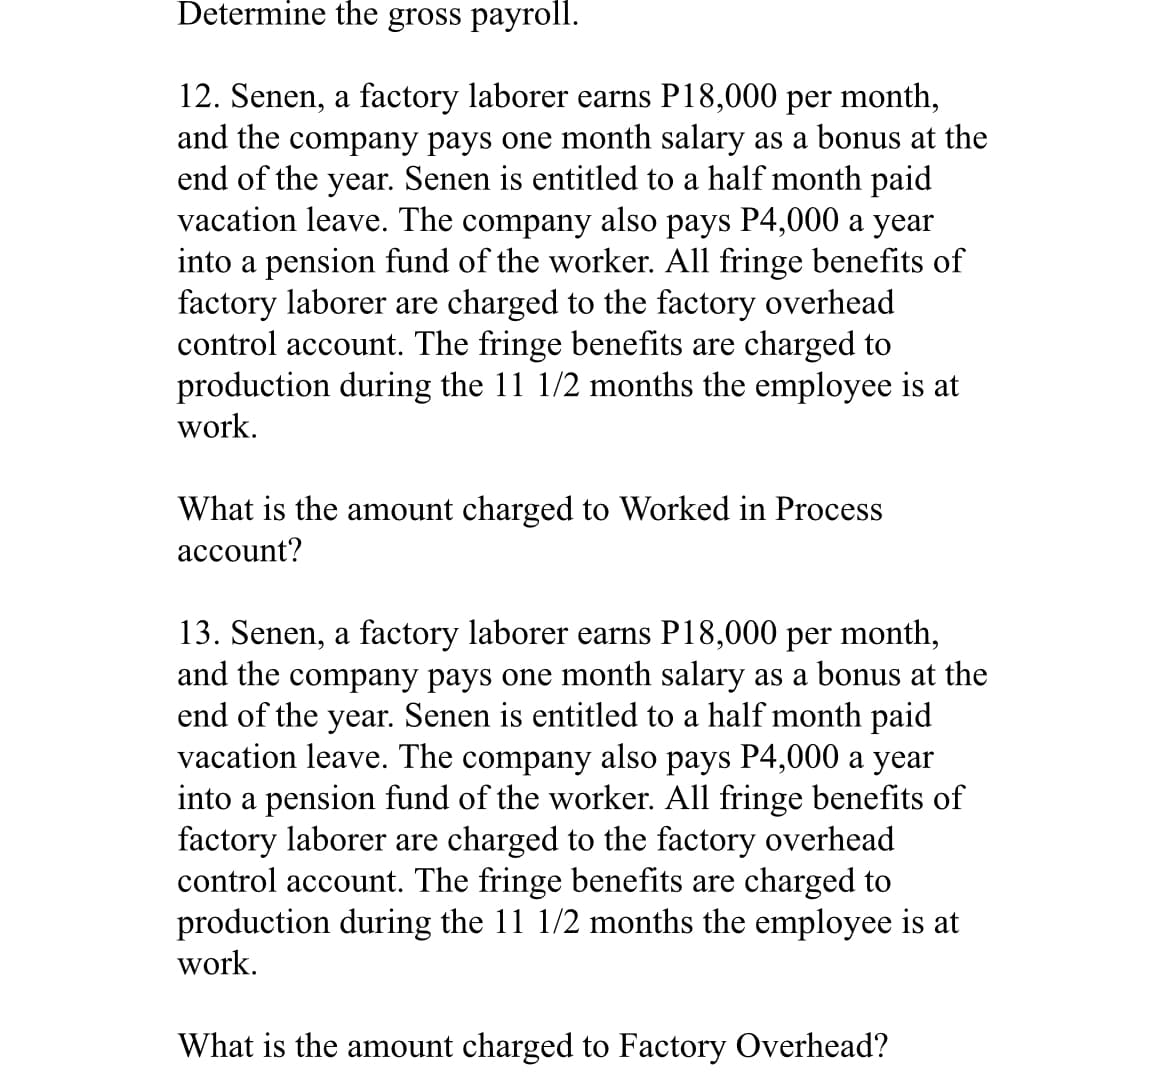 Determine the gross payroll.
12. Senen, a factory laborer earns P18,000 per month,
and the company pays one month salary as a bonus at the
end of the year. Senen is entitled to a half month paid
vacation leave. The company also pays P4,000 a year
into a pension fund of the worker. All fringe benefits of
factory laborer are charged to the factory overhead
control account. The fringe benefits are charged to
production during the 11 1/2 months the employee is at
work.
What is the amount charged to Worked in Process
account?
month,
13. Senen, a factory laborer earns P18,000 per
and the company pays one month salary as a bonus at the
end of the year. Senen is entitled to a half month paid
vacation leave. The company also pays P4,000 a year
into a pension fund of the worker. All fringe benefits of
factory laborer are charged to the factory overhead
control account. The fringe benefits are charged to
production during the 11 1/2 months the employee is at
work.
What is the amount charged to Factory Overhead?
